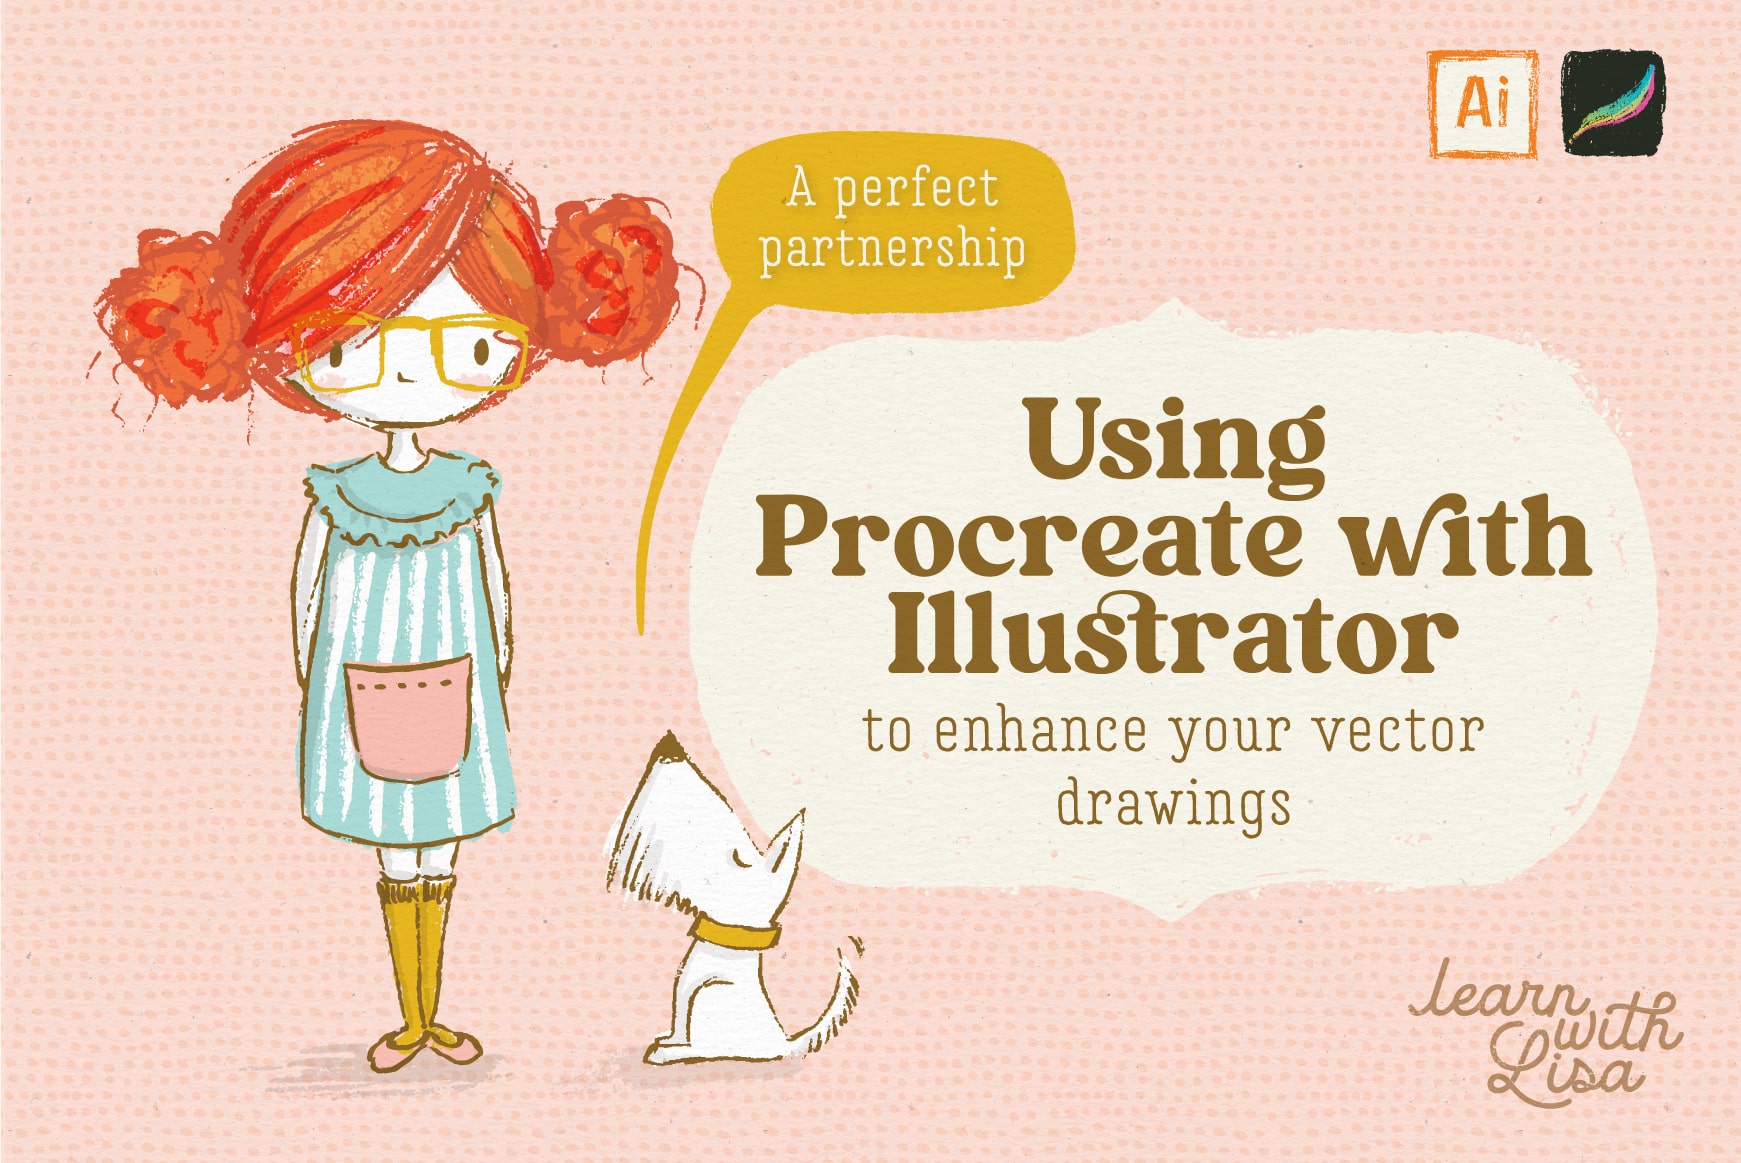 Using Procreate with Illustrator to enhance your vector drawings